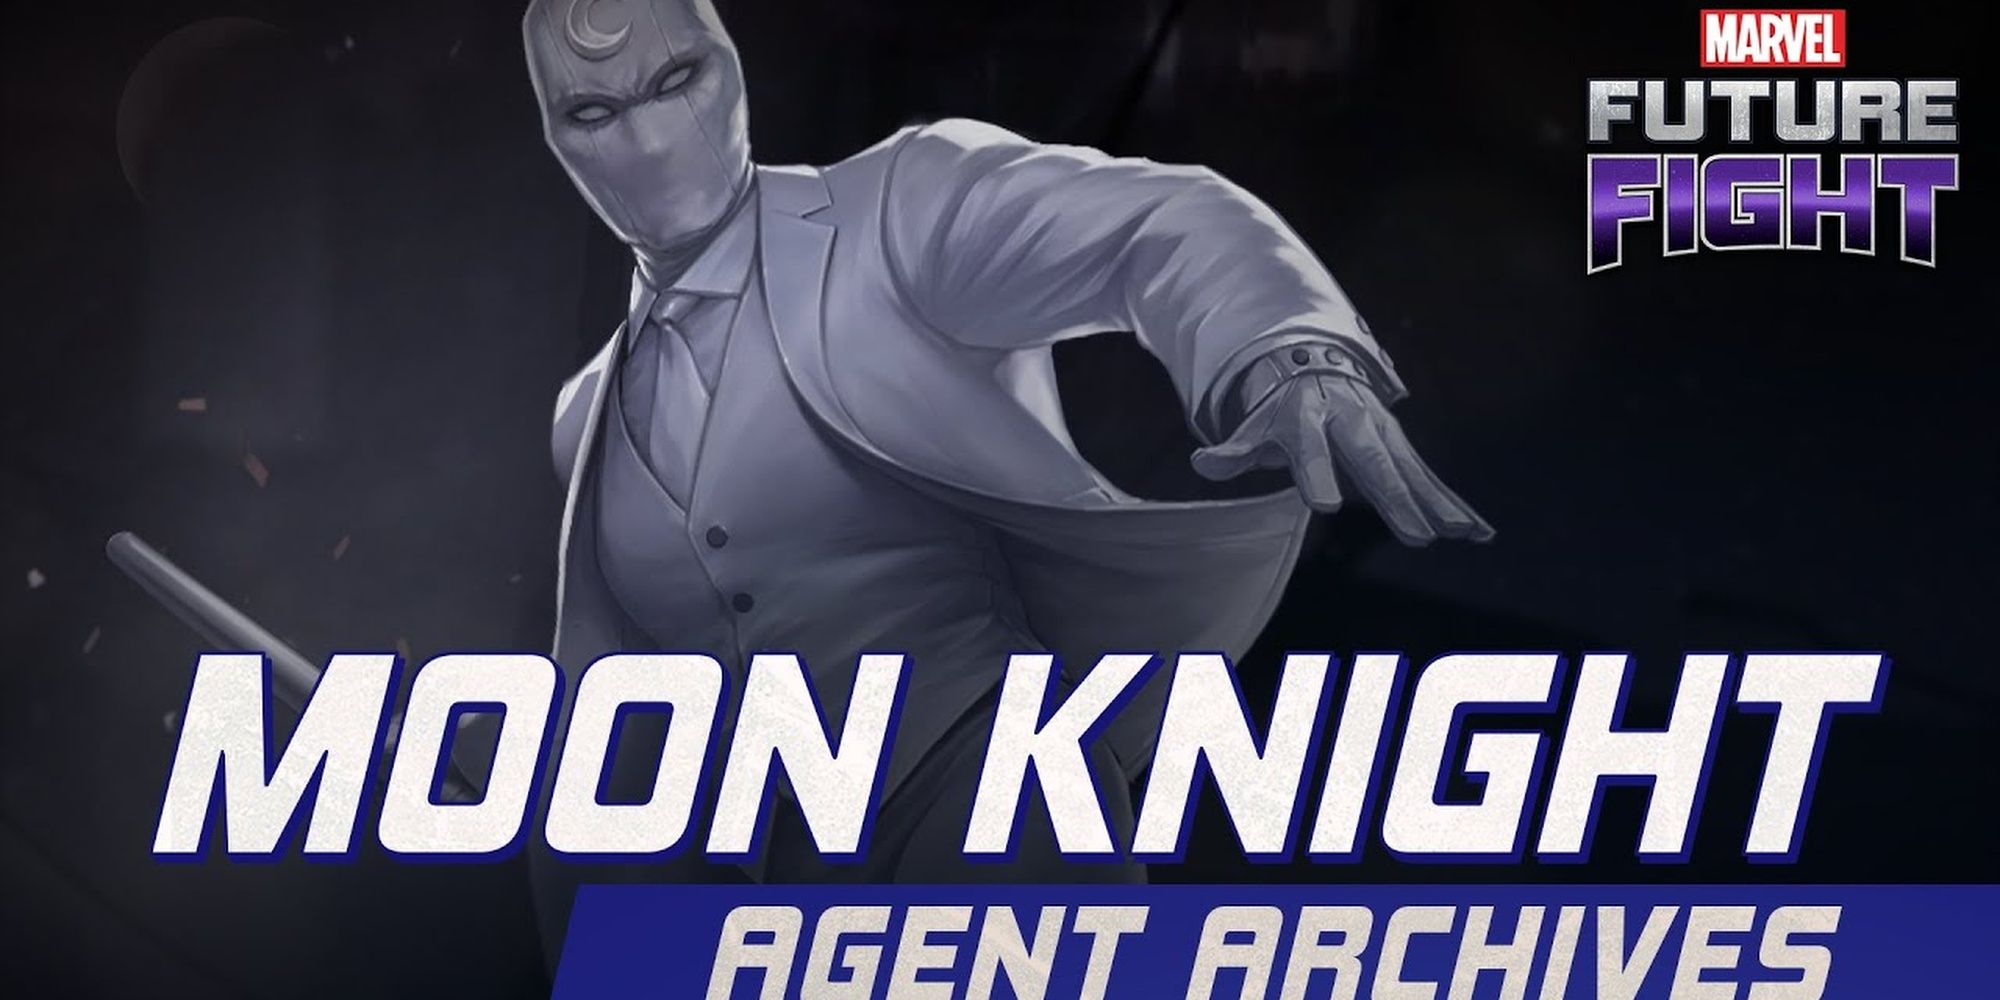 Mr. Knight featured in Marvel Future Fight